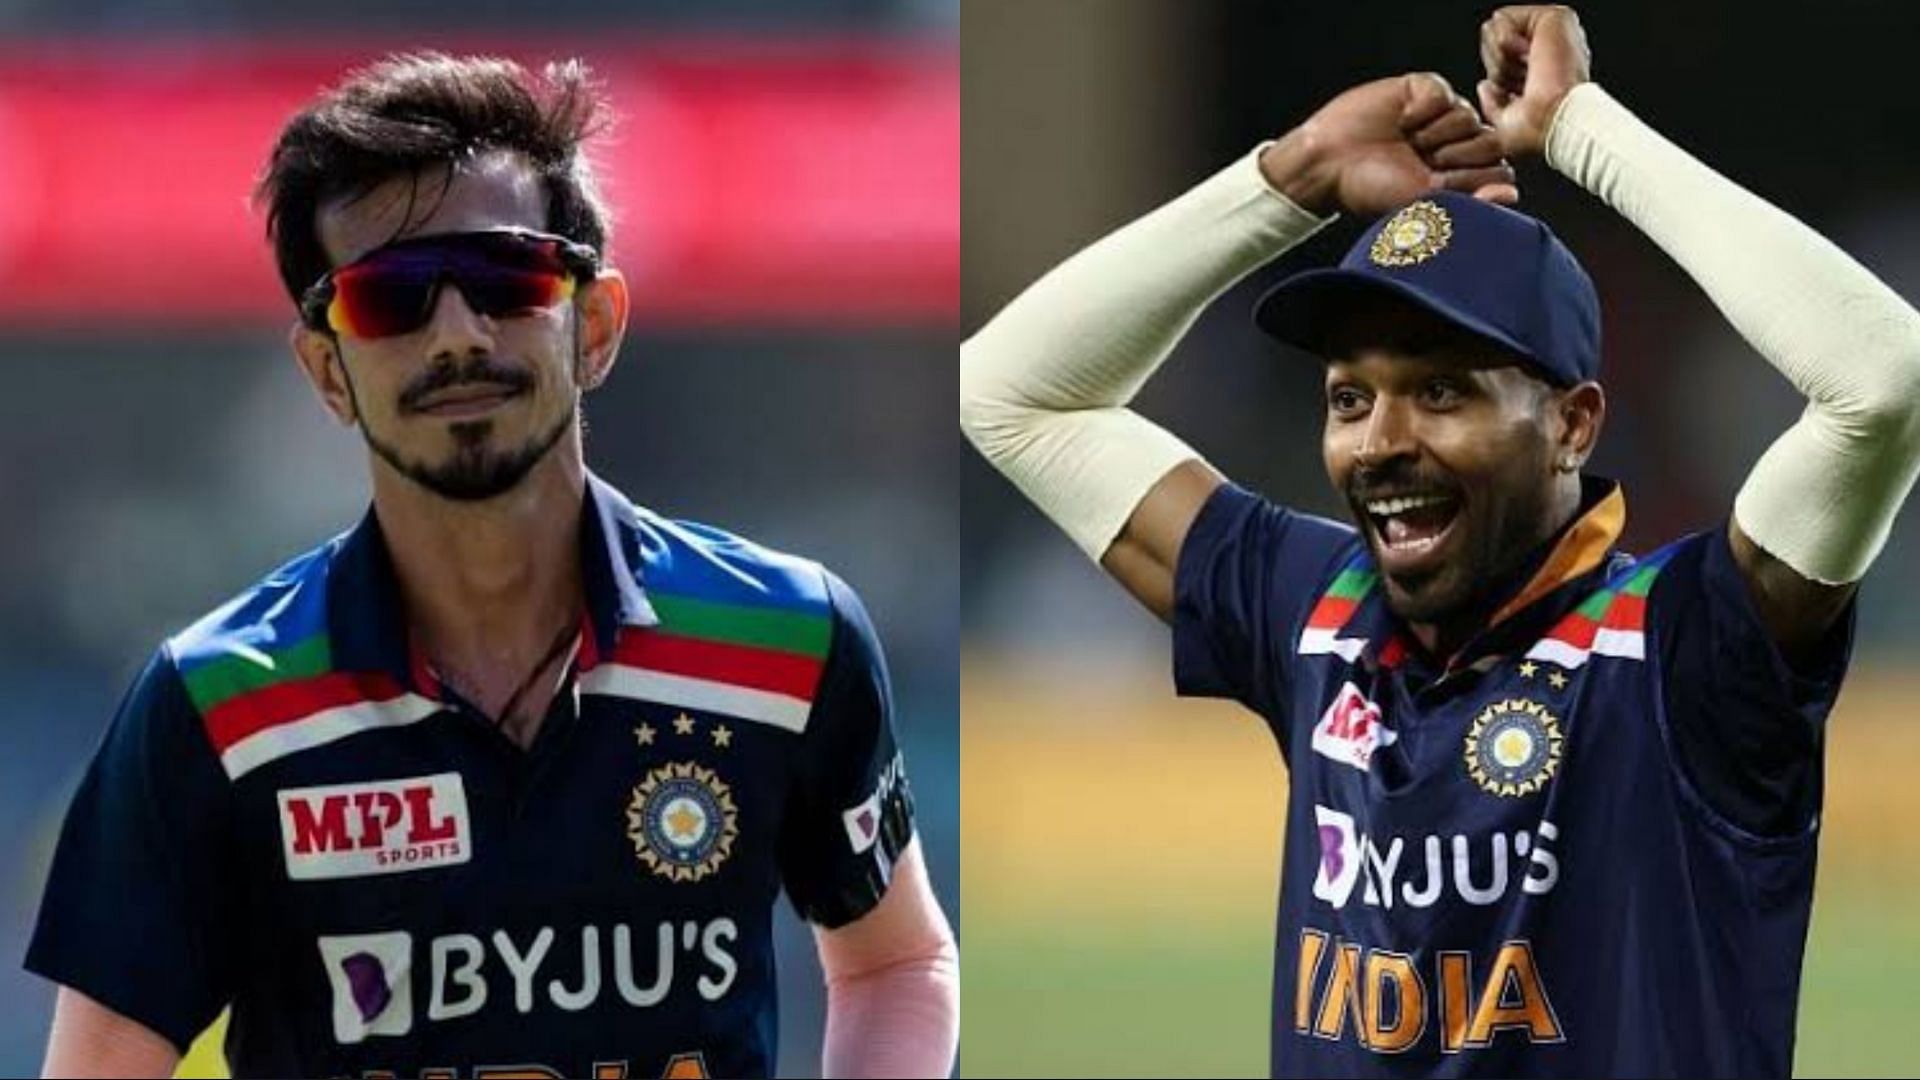 Yuzvendra Chahal and Hardik Pandya have performed excellently in IPL 2022